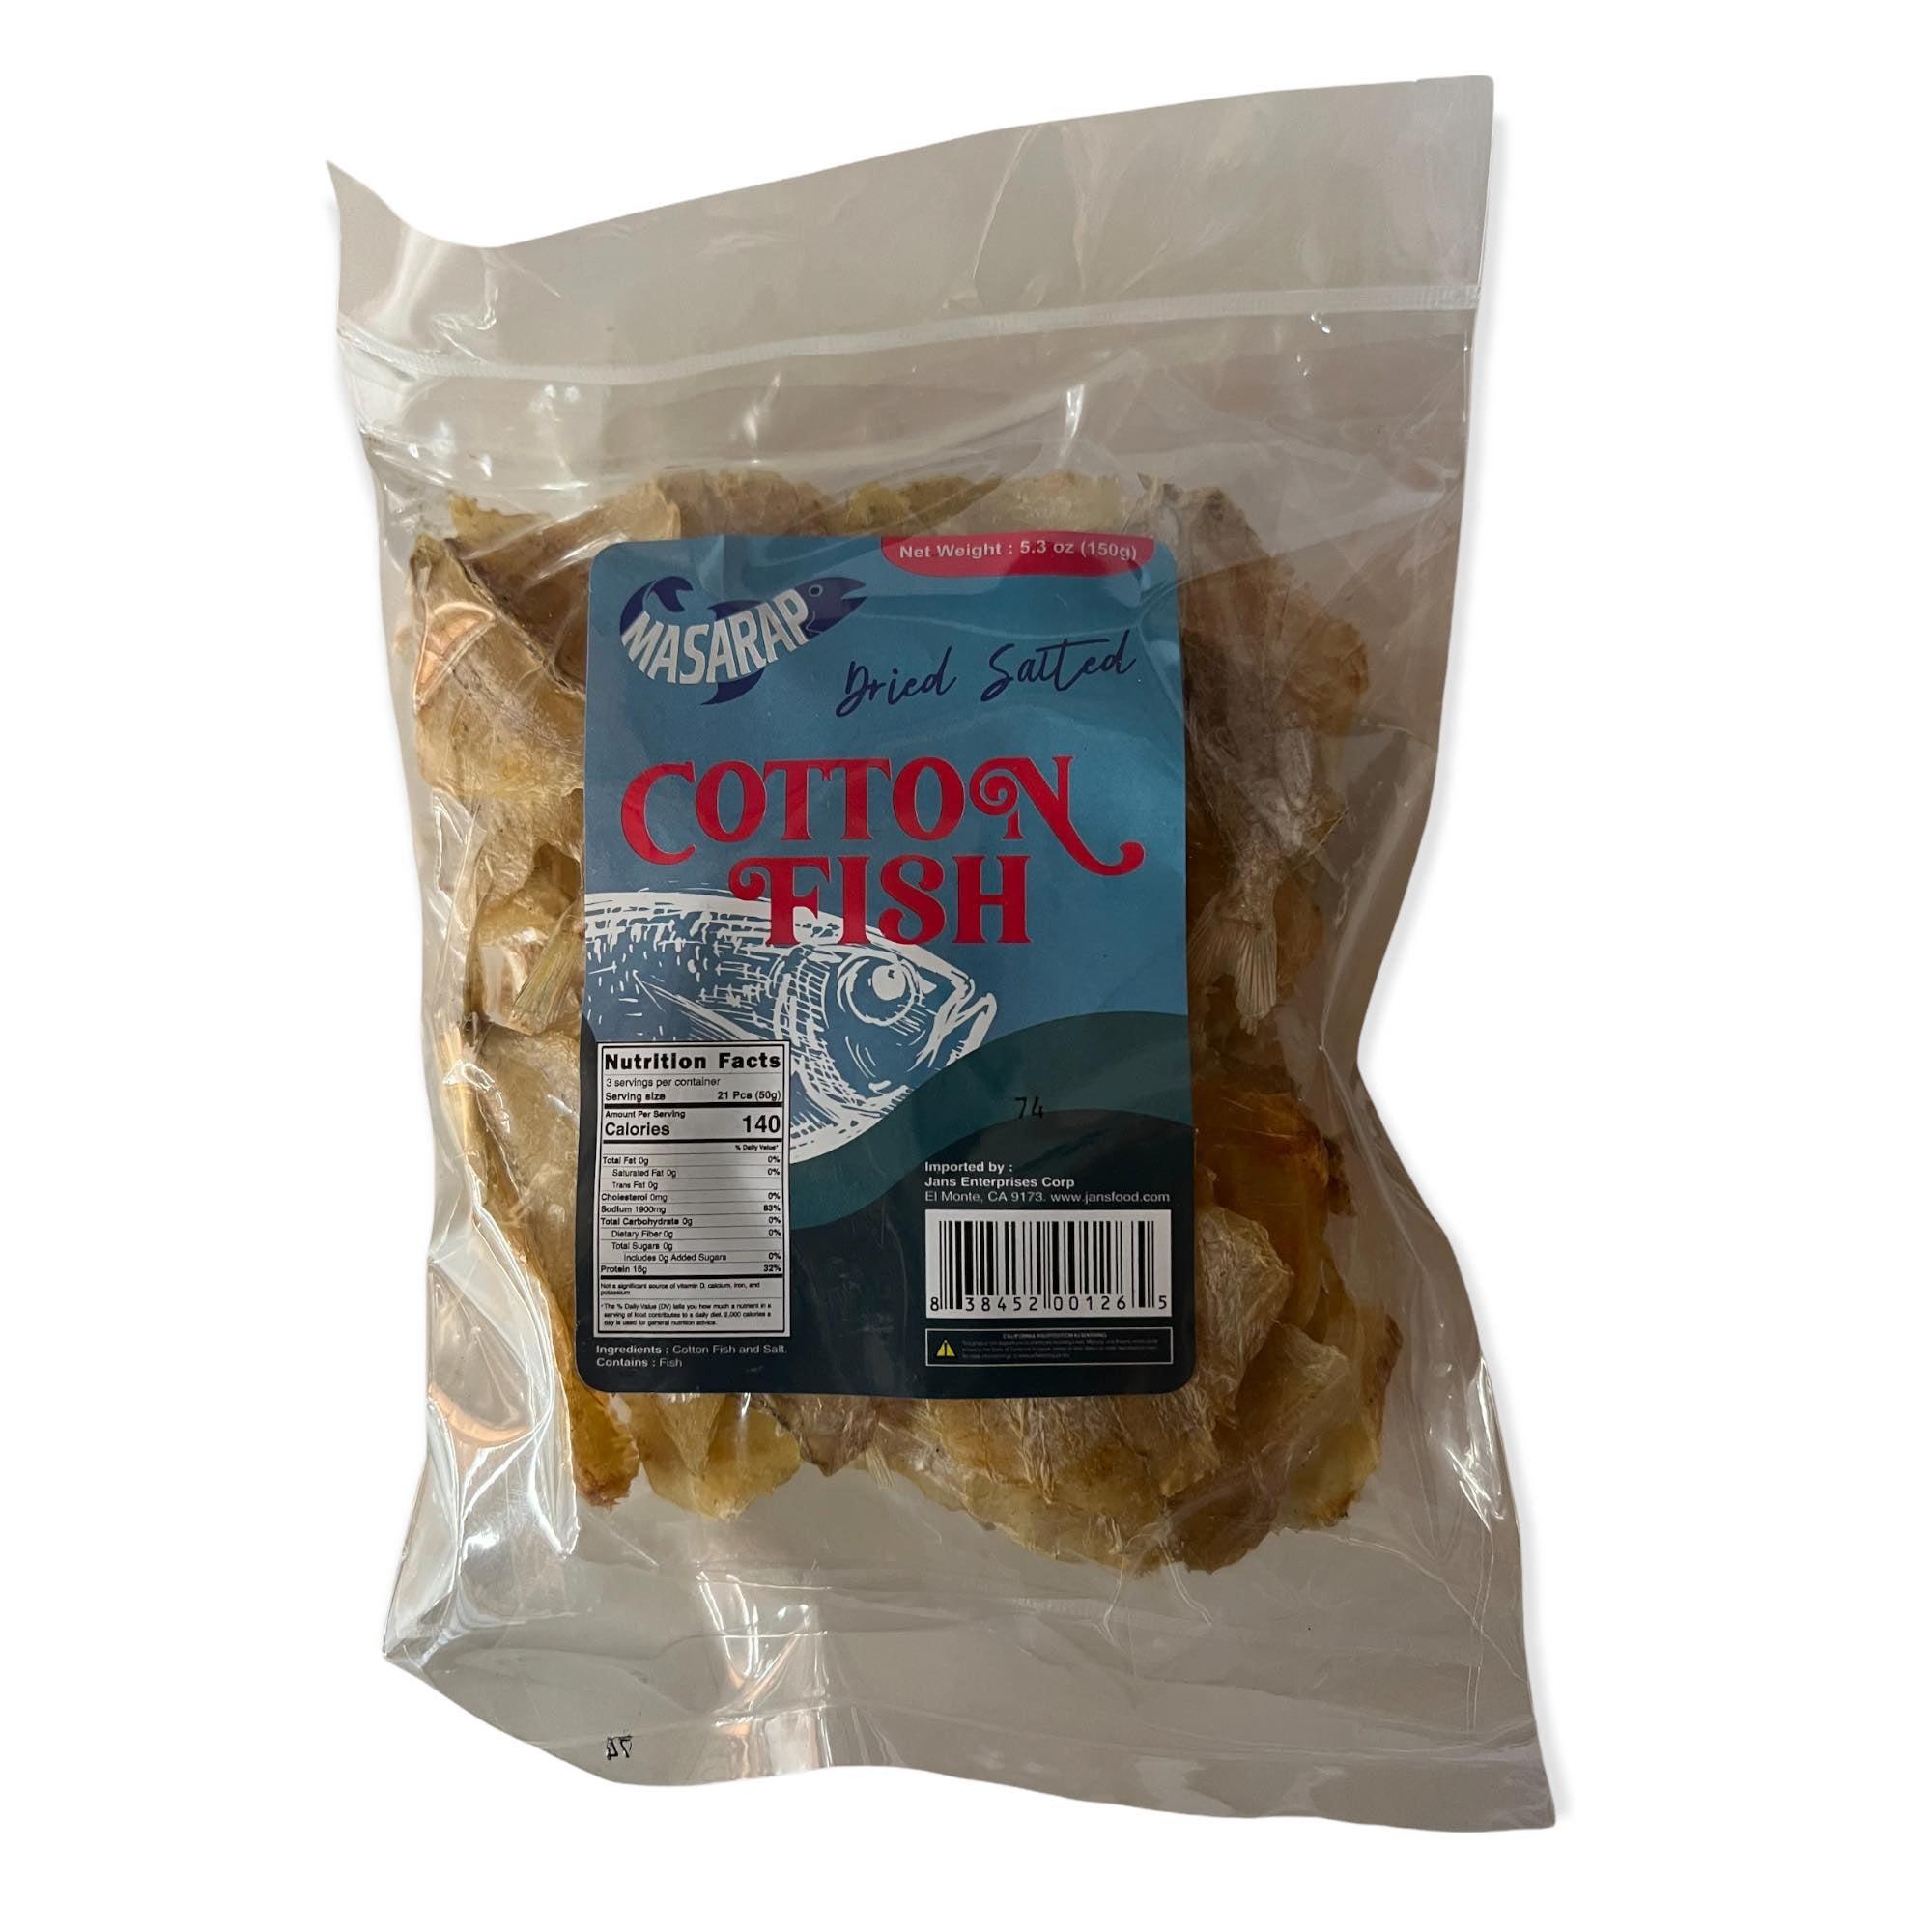 Masarap - Dried Salted Cotton Fish - 150 G